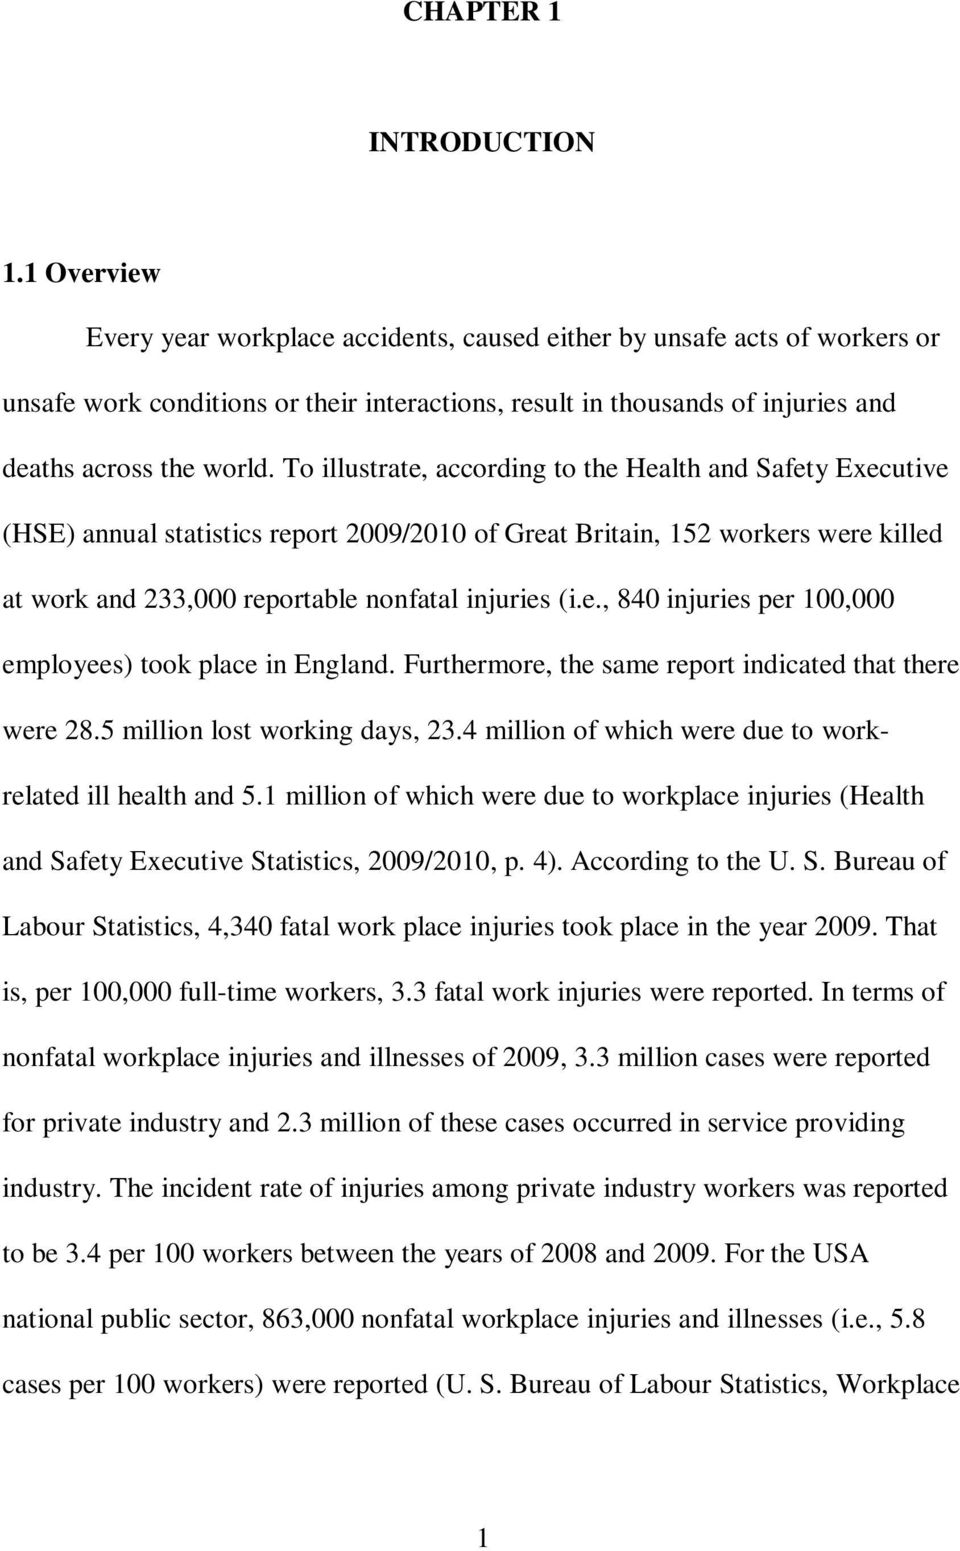 To illustrate, according to the Health and Safety Executive (HSE) annual statistics report 2009/2010 of Great Britain, 152 workers were killed at work and 233,000 reportable nonfatal injuries (i.e., 840 injuries per 100,000 employees) took place in England.